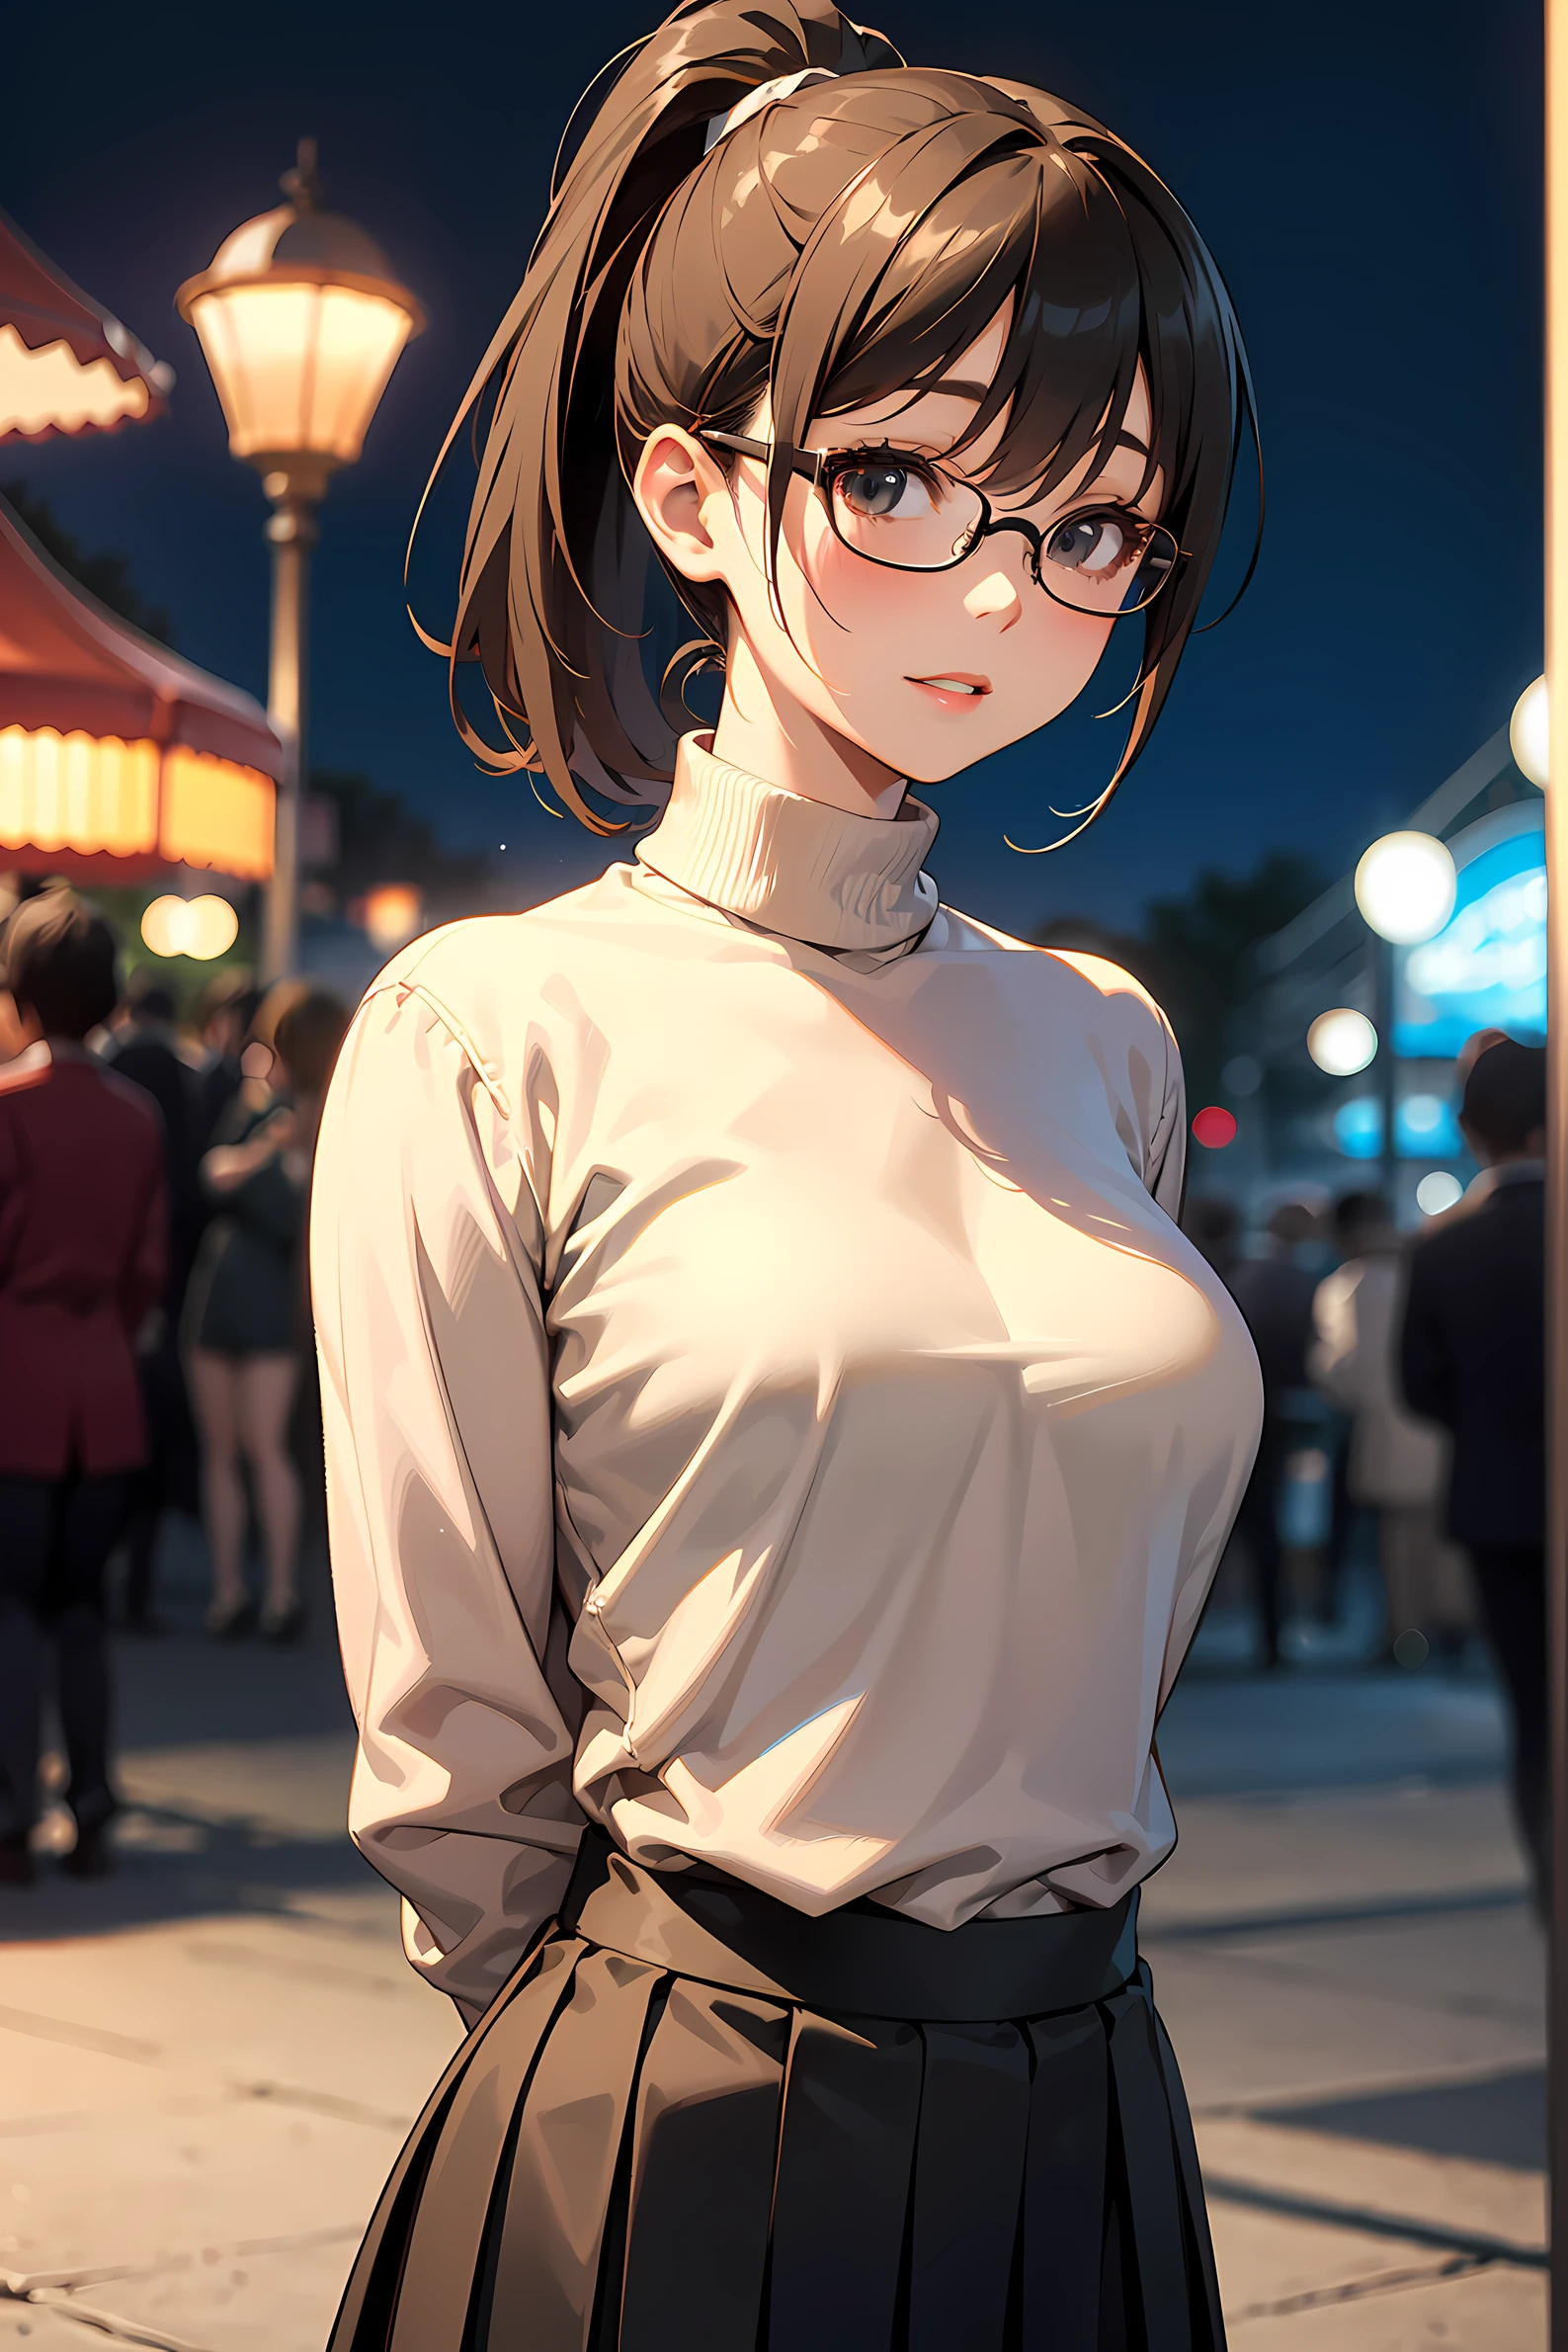 high resolution, Photo of a beautiful woman detailed_face, young handsome girl,realistic:0.5, perfect skin, (wearing a glasses:1.5), (ultra-detailed background, detailed background), bokeh, make happy expressions, happy emotion, gorgeous,pure, beautyfull detailed face and eyes,breasts, (black eyes:1.1), (a extremely pretty and beautiful Japanese woman), (sexy girl), (professional attire:1.3), (22 years old: 1.1), BREAK, (lovely outfit:1.2), (detailed blue turtleneck sweater:1.2), (beige pleats skirt:1.2), (leather boots))), cleavage, beautiful detailed skin, (cute:1.2), (blonde hair), ((jpop idol)), (upper thigh:0.6), (depth of field),soft light, Lens Glow looking at viewer, (Drooping eyes:1.2), straight teeth,smile, floating hair, (blond hair:1.2), brown eyes BREAK movie scene, cinematic, full colors, 4k, 8k, 16k, RAW photo, masterpiece, professionally color graded, professional photography, high school girl, hair up, , soft clean focus, realistic lighting and shading, (an extremely delicate and beautiful art)1.3, elegant,active angle,dynamism pose BREAK (ponytail:1.3), (shiny-black thin hair:1.2), bangs, dark brown eyes, beautiful eyes, princess eyes, (big eyes:1.3), bangs, wearing a glasses:1.3, Hair between eyes, short hair:1.3, (slender:1.1), (medium-breasts:0.95), (thin waist: 1.15), (detailed beautiful girl: 1.4), Parted lips, Red lips, full-make-up face, (shiny skin), ((Perfect Female Body)), (upper body image:1.3), Perfect Anatomy, Perfect Proportions, (most beautiful Korean actress face:1.3, extremely cute and beautiful Japanese actress face:1.3), ,(1glasses girl:1.3, solo), ,(blush:1.1), gray background, solo focus, (bust shot:1.2), cinematic light, (nostalgic night scene:1.4), (amusement park:1.4), (merry-go-round、the Ferris wheel、rollercoaster), (arms behind back :1.4), (looking at viewer:1.2